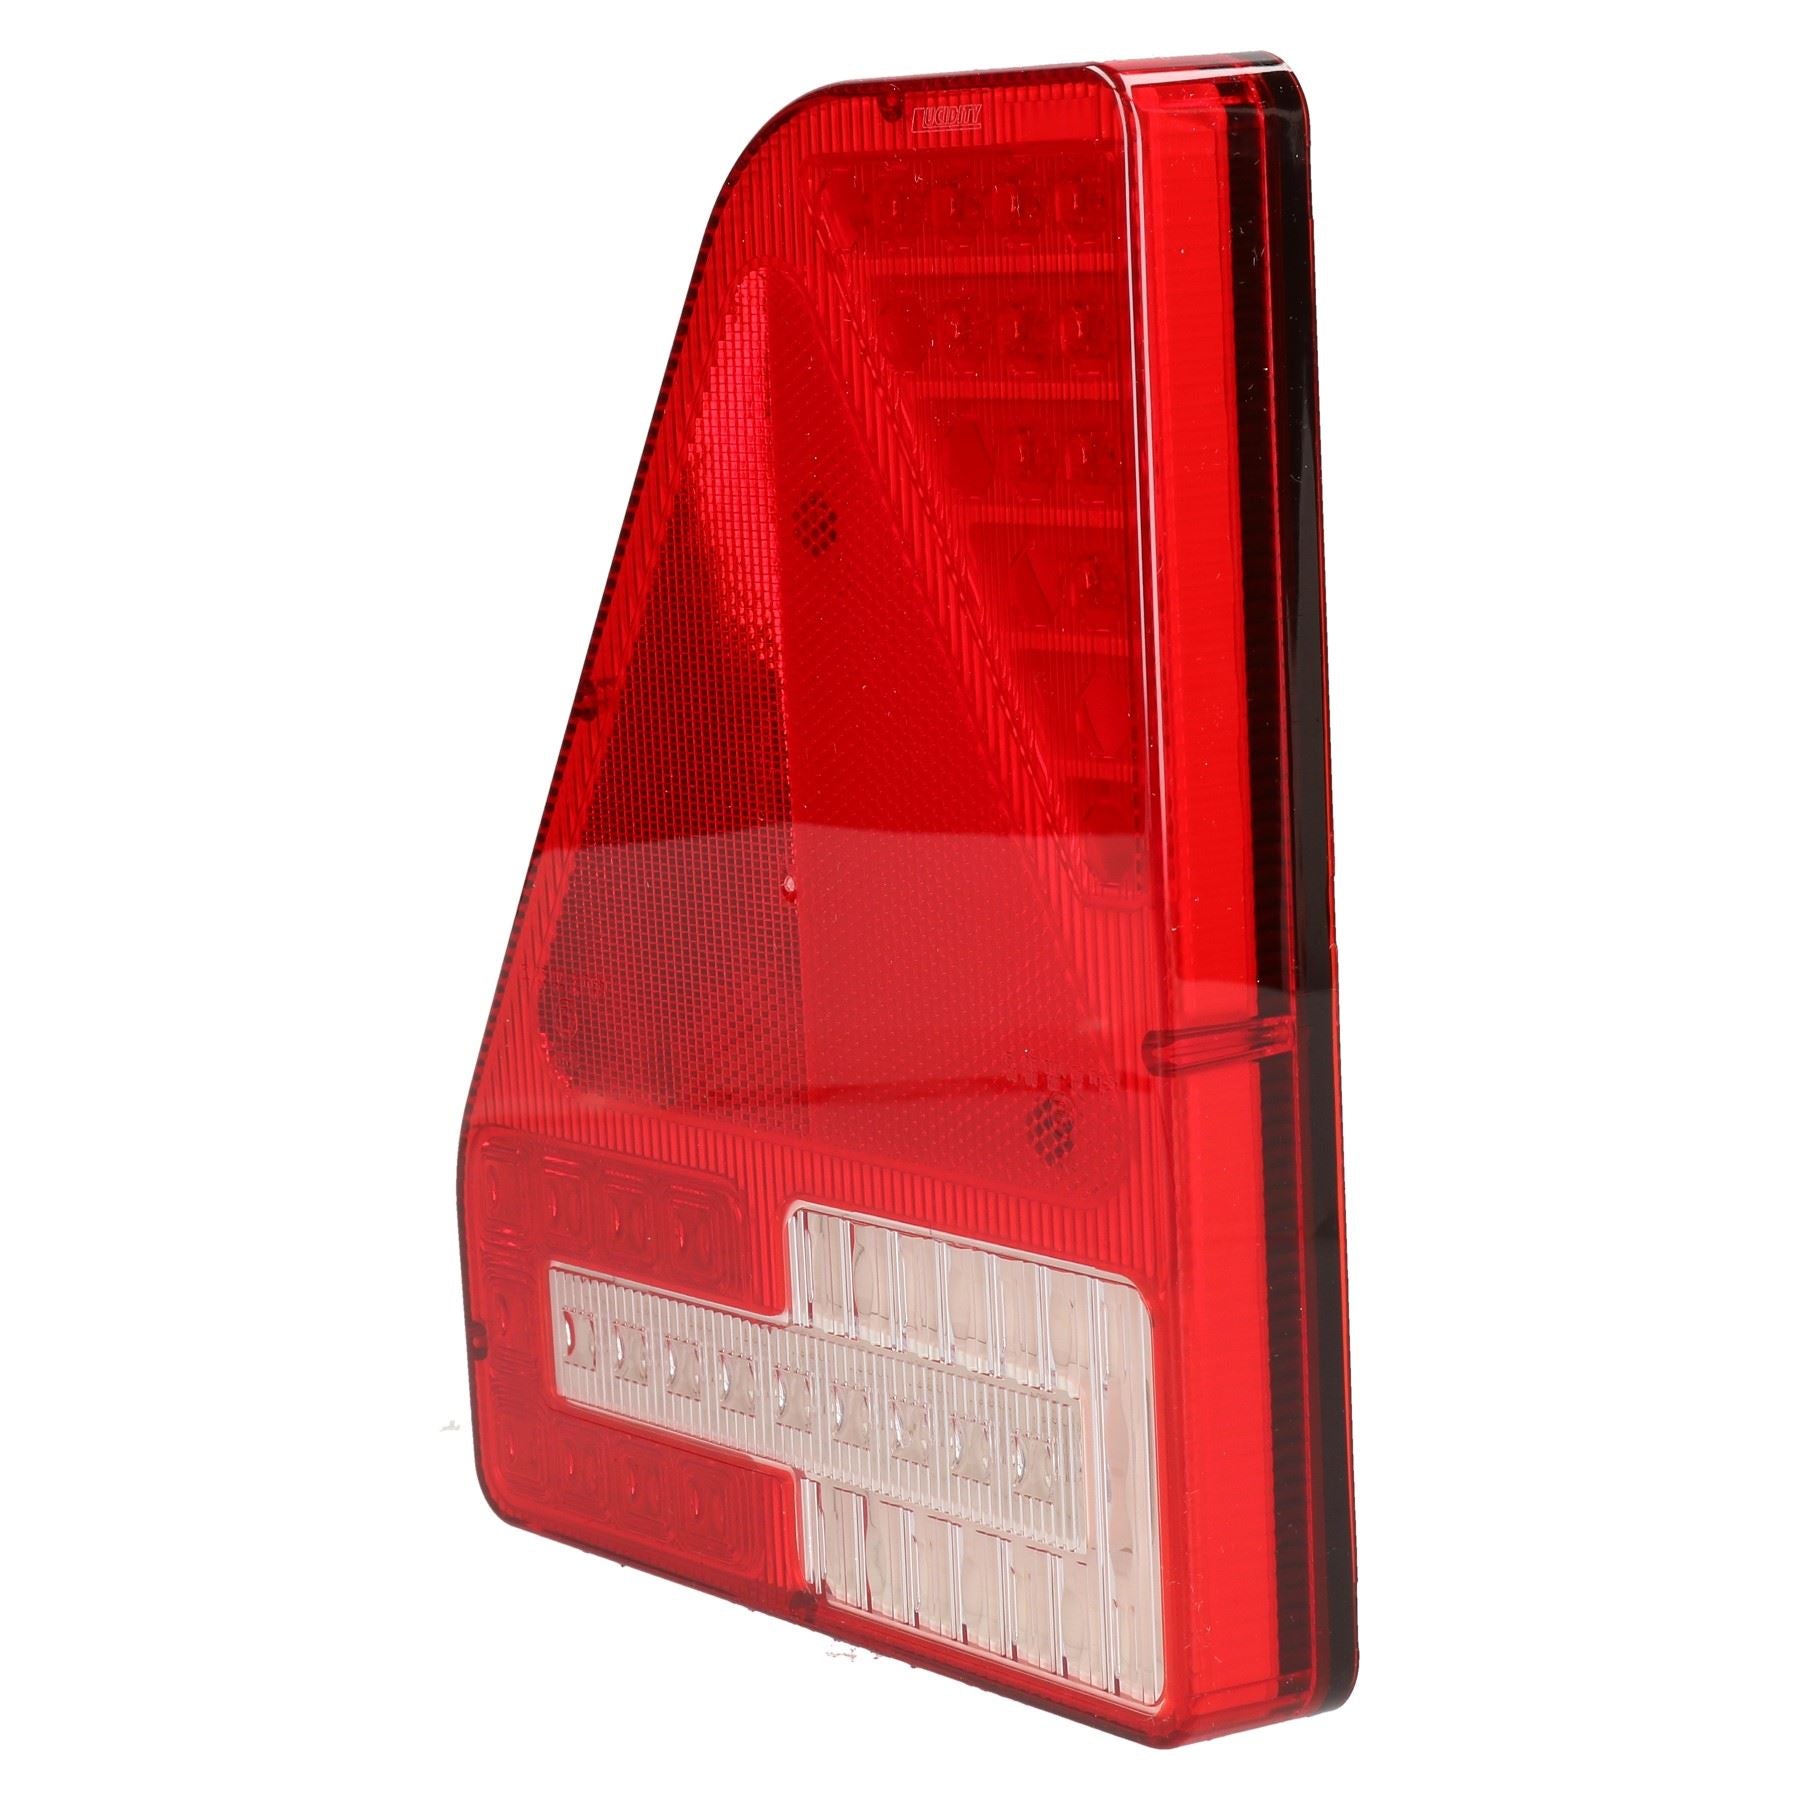 Indespension LED Rear Left Hand Light for Euro Trailers with 5 Pin Plug